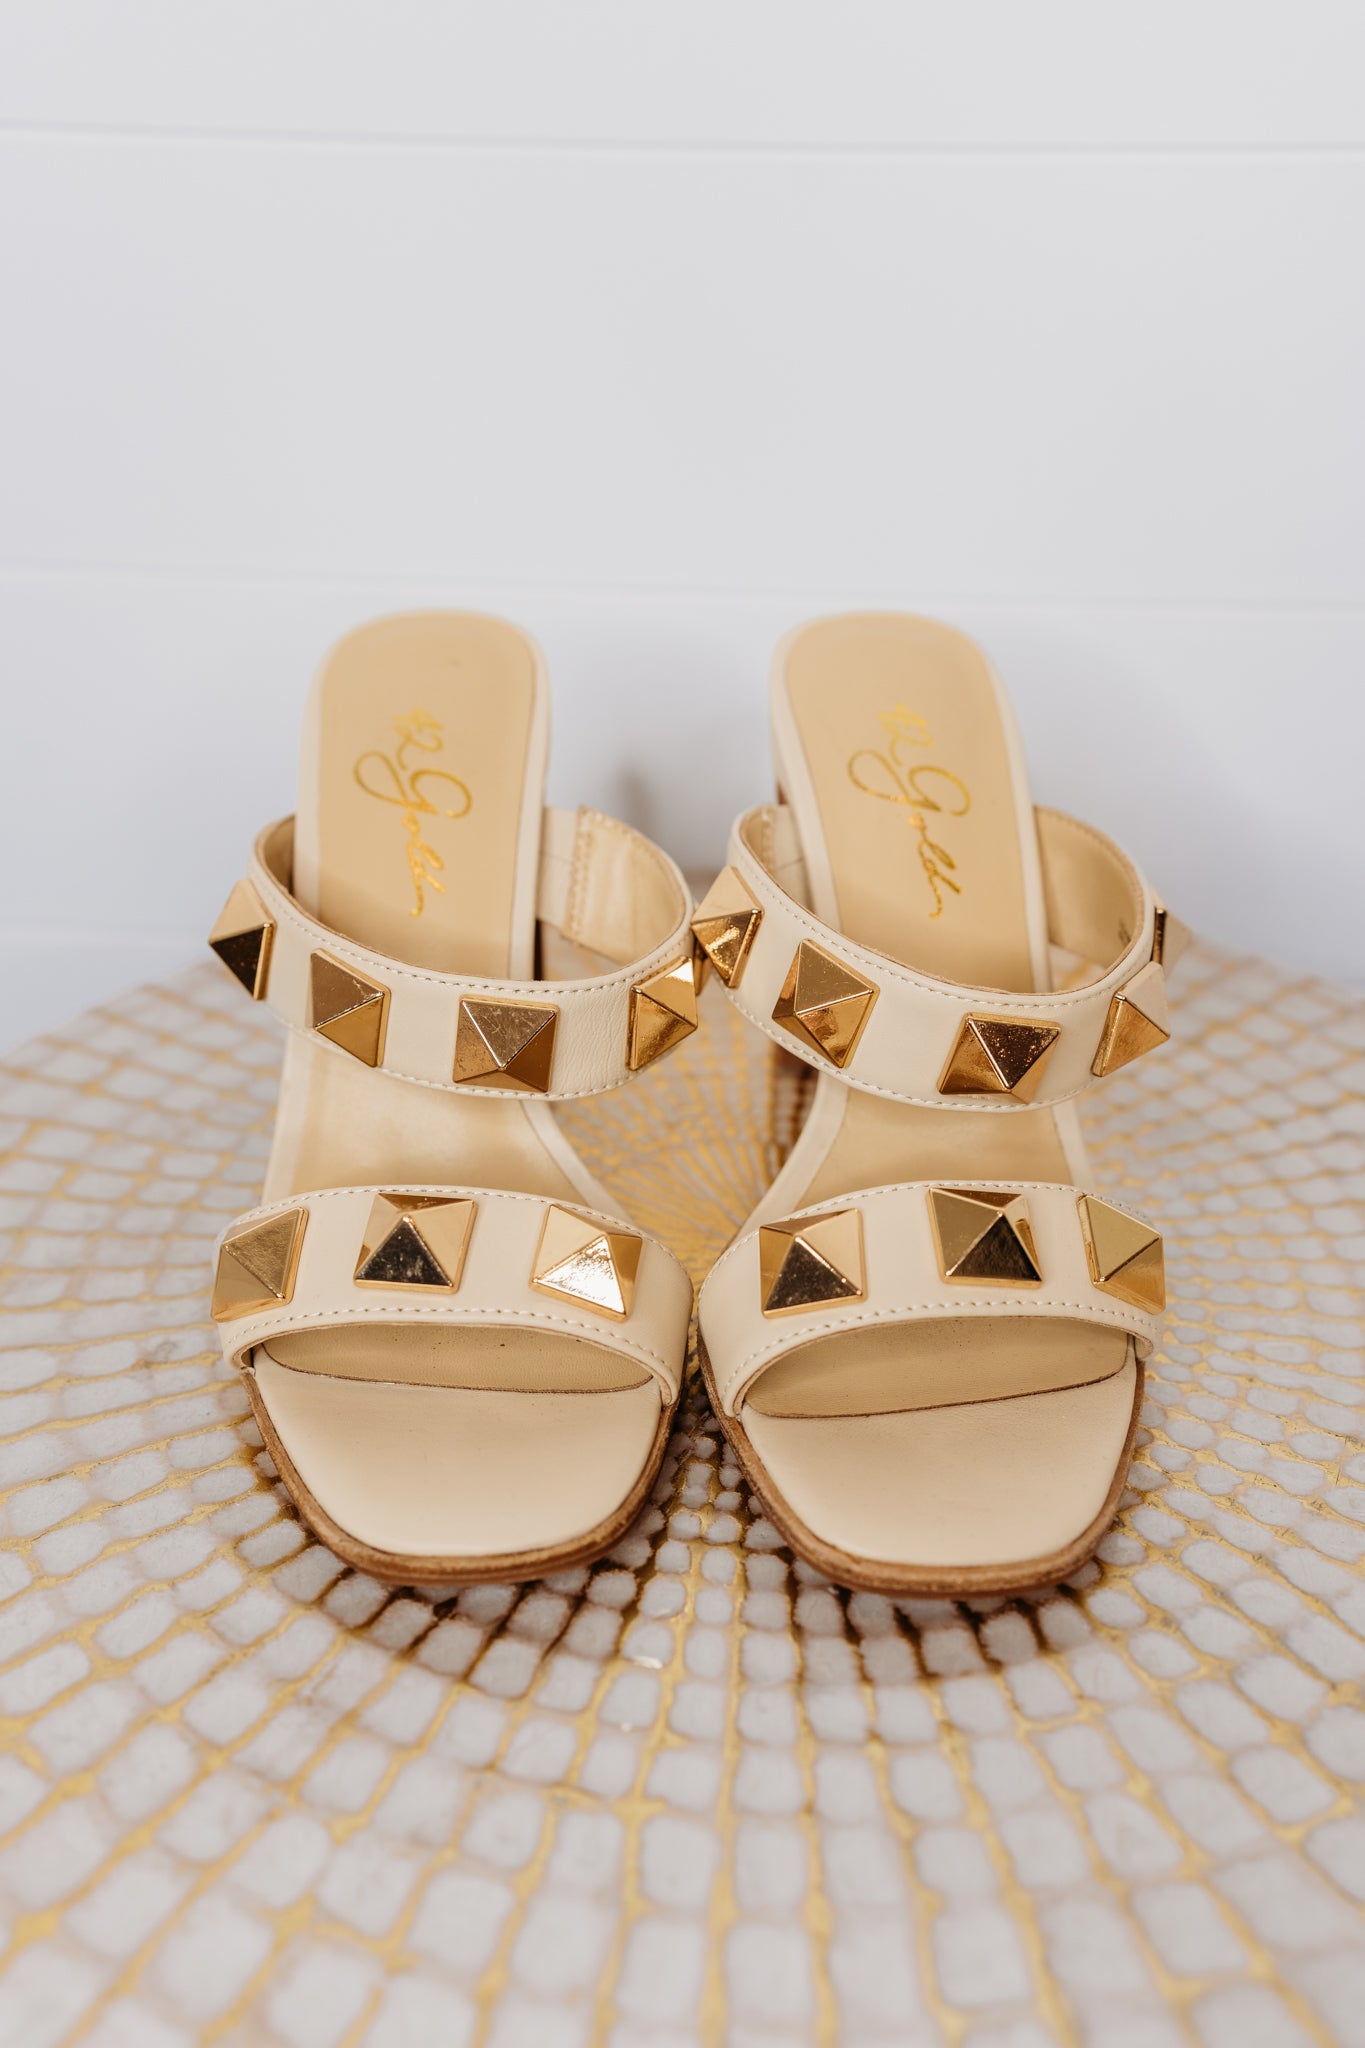 The Lara Studded Heel in Cream by 42Gold